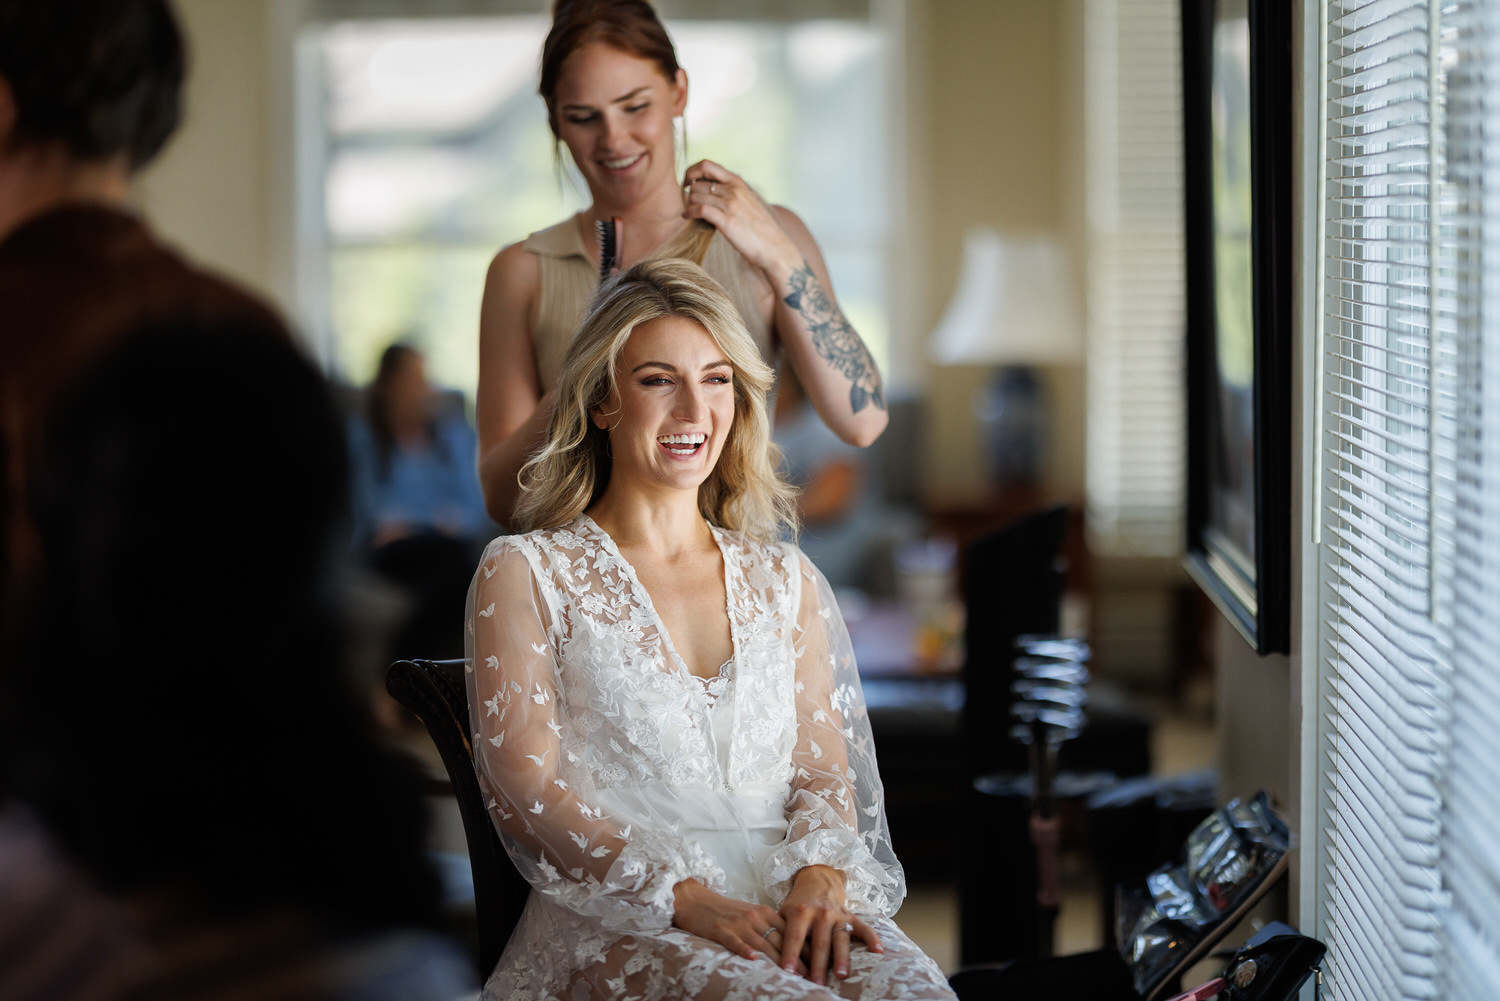 getting ready for your wedding day photos tips